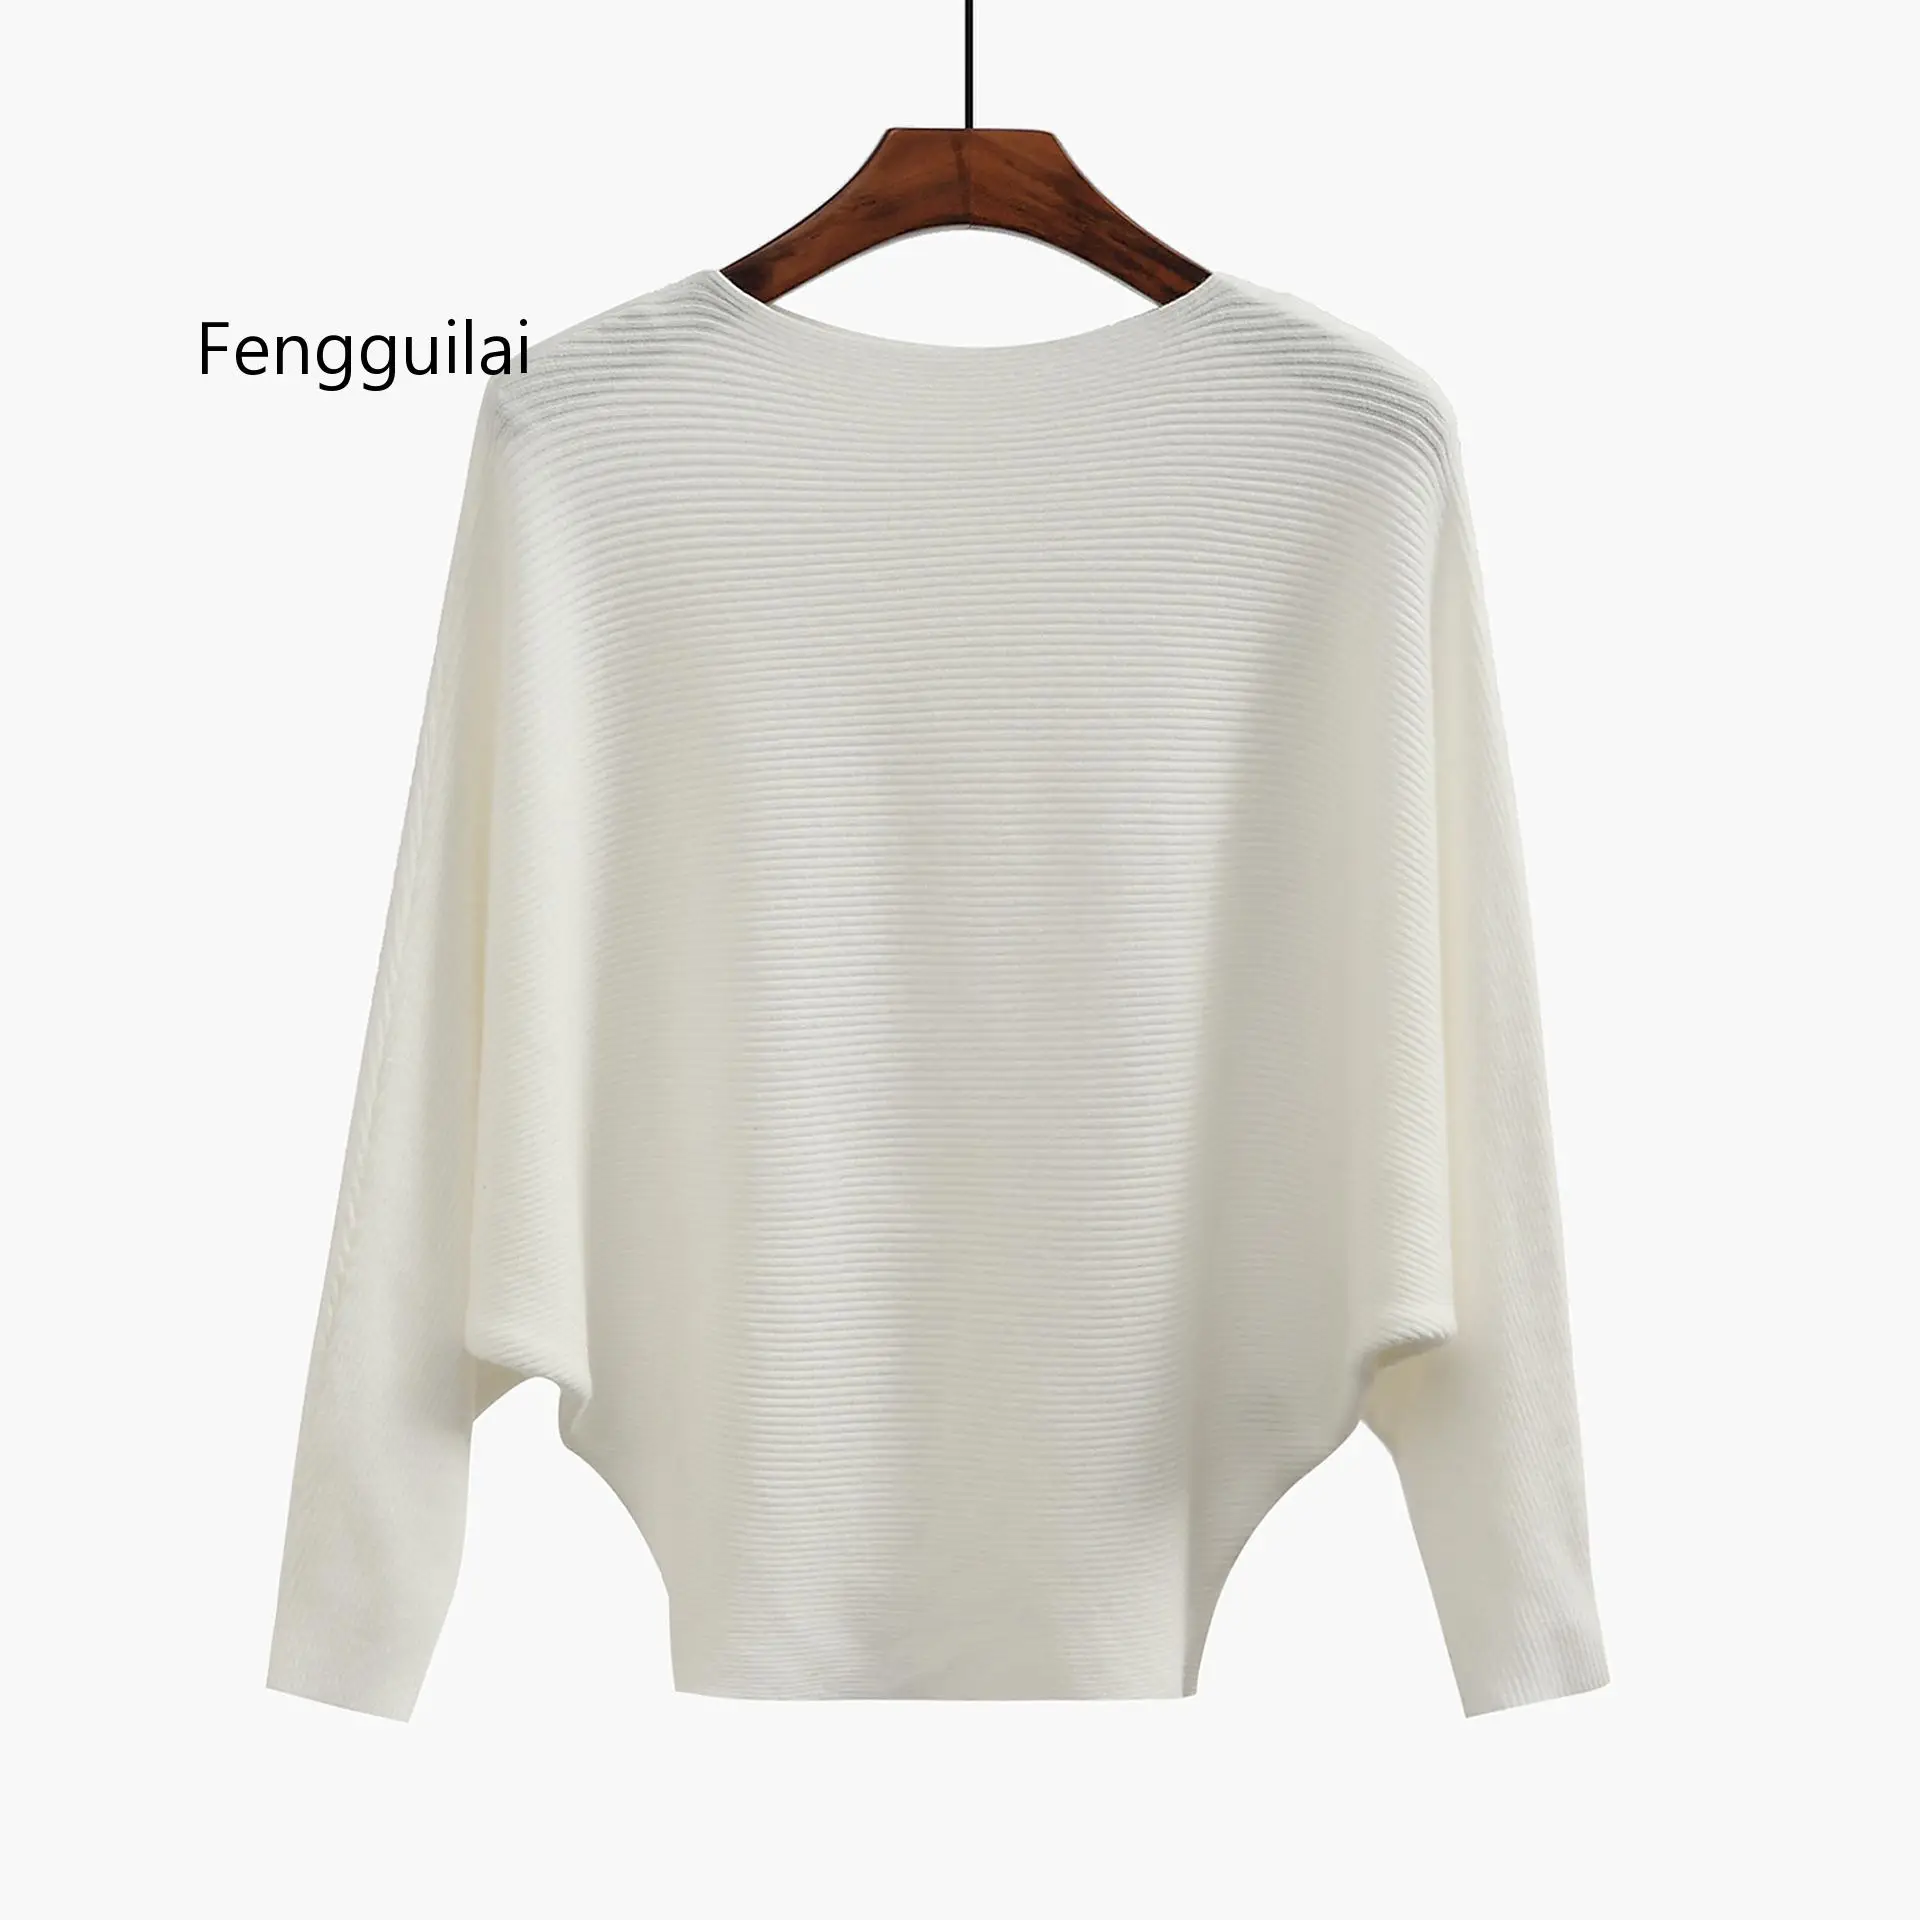 

Women's Sweaters and Pullovers Coat Batwing Sleeves Loose Cashmere Sweatershirt Slash neck Female Wool Knitted Brand Jumpers